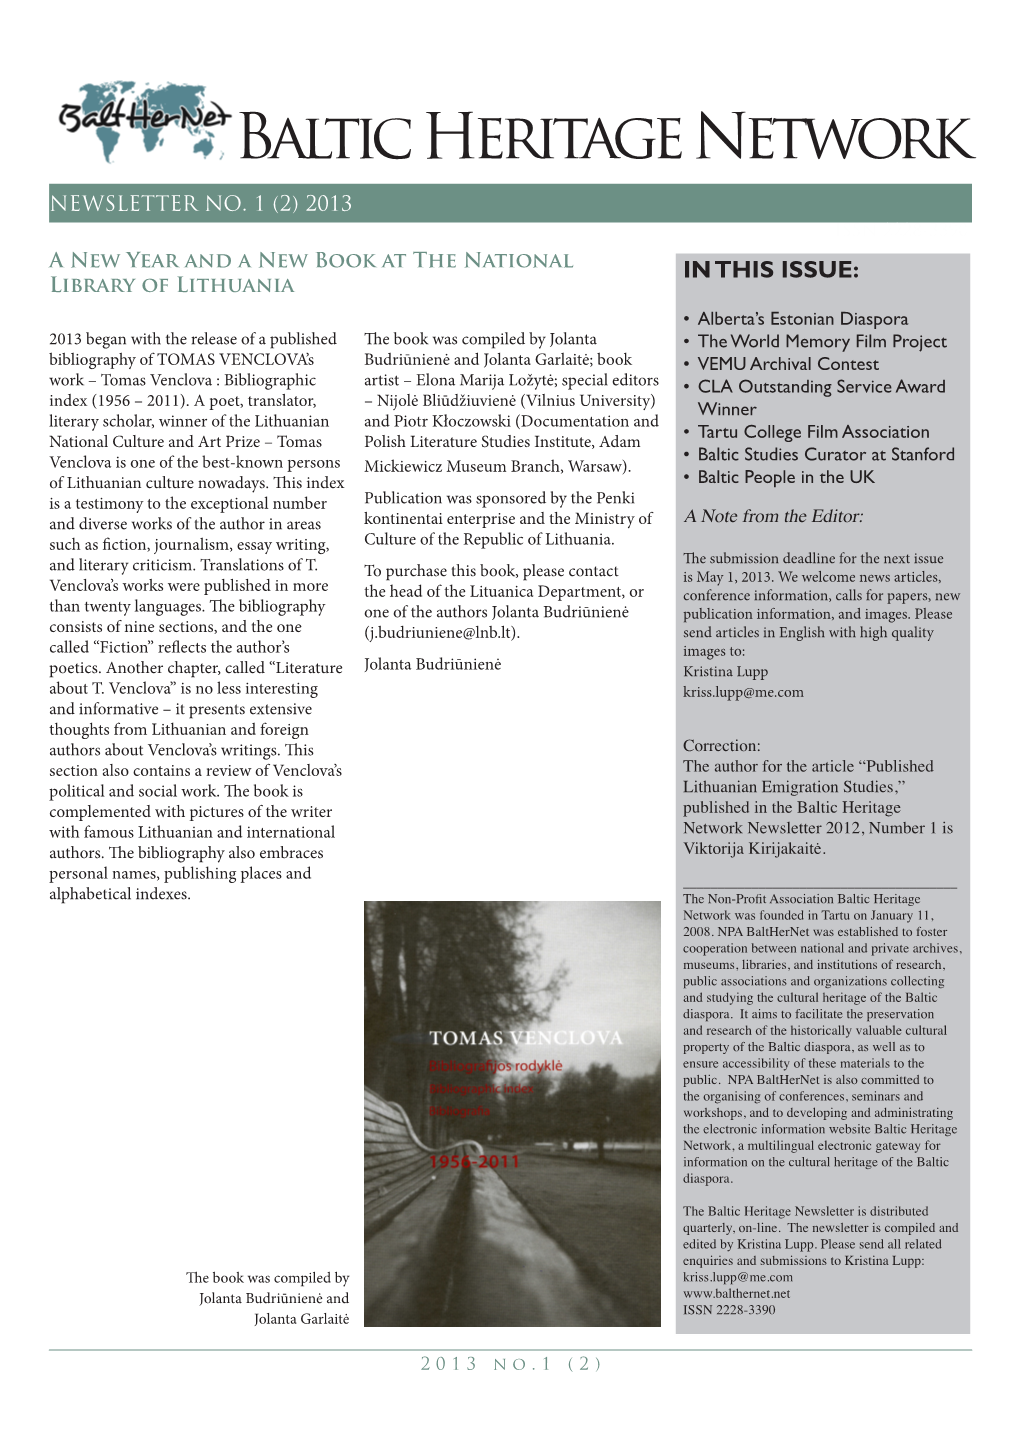 Baltic Heritage Network Newsletter 2013, No.1